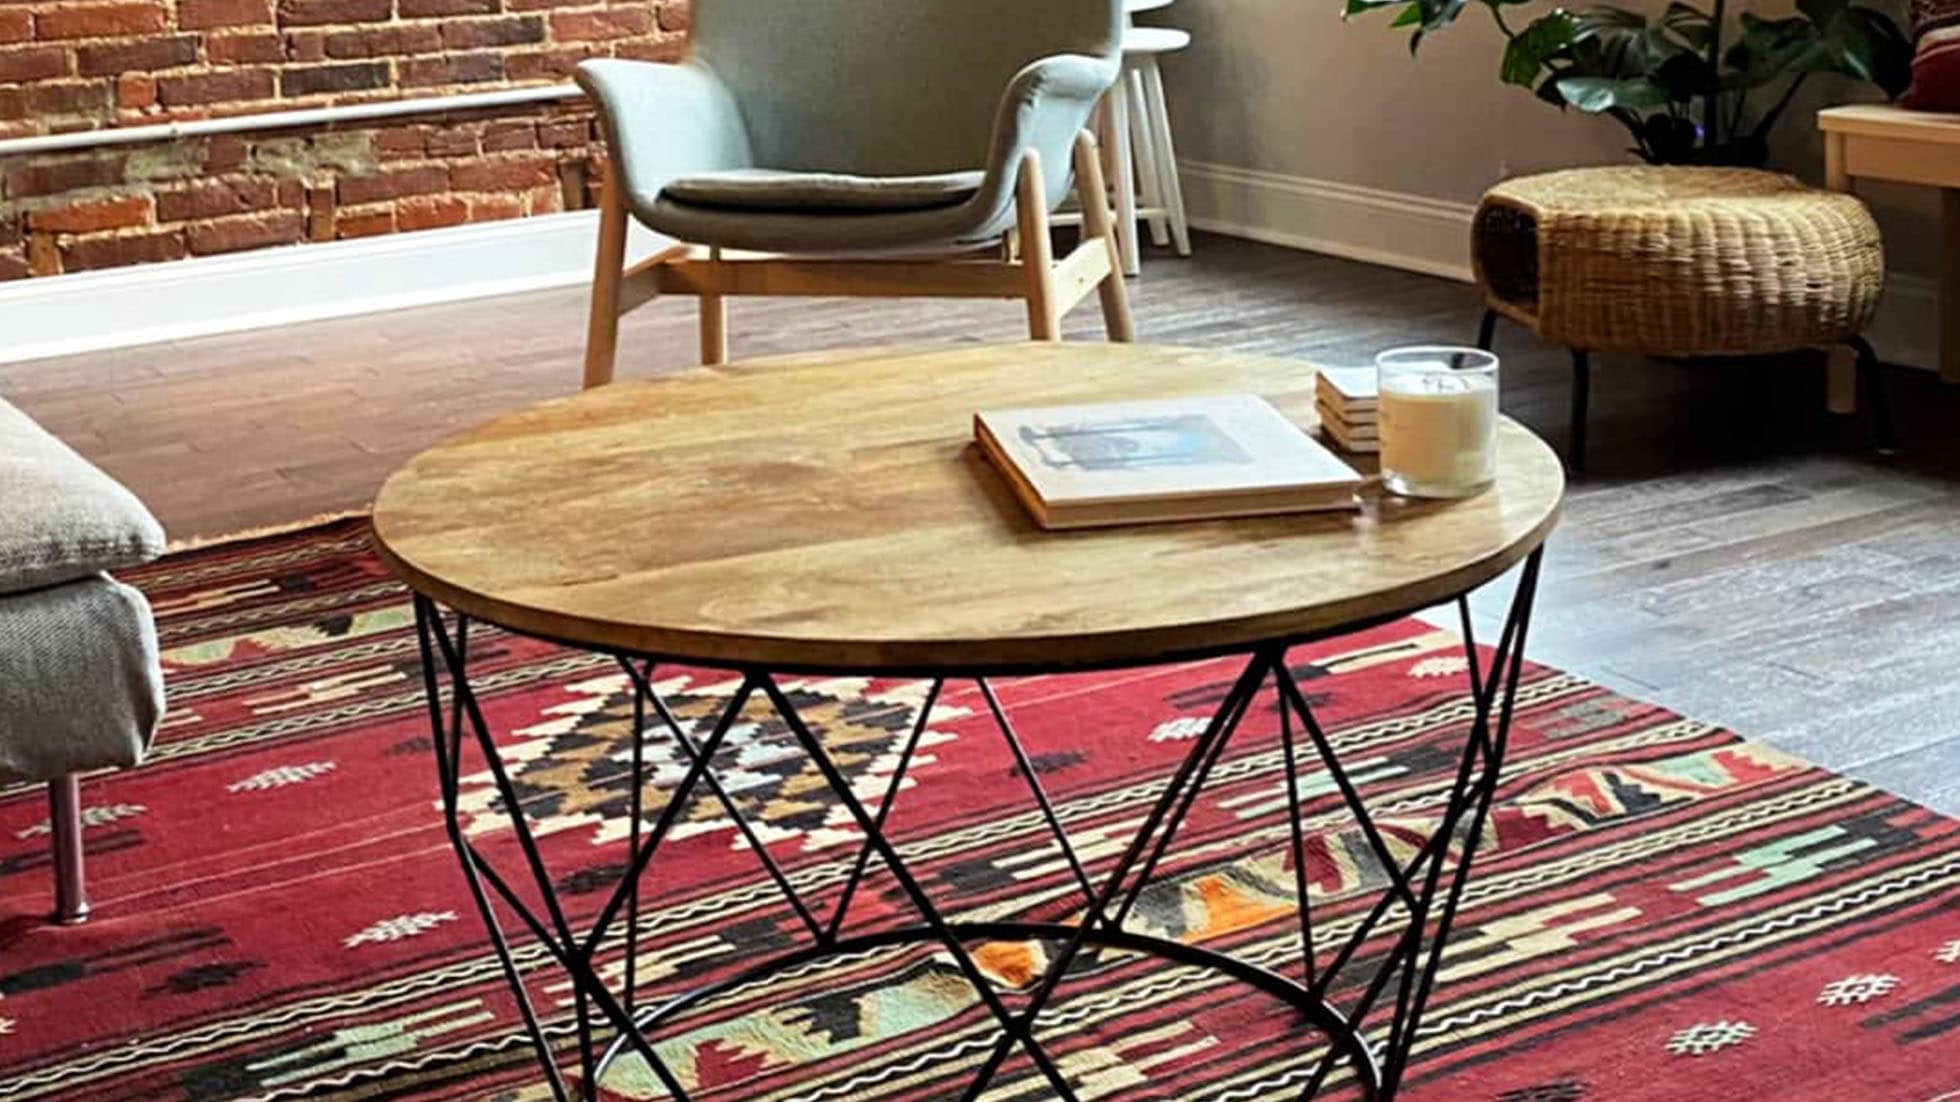 a beautiful red oriental Turkish kilim rug from mid-century era is displayed in Manhattan, New York apartment from Kilim Couture's vintage rug collection